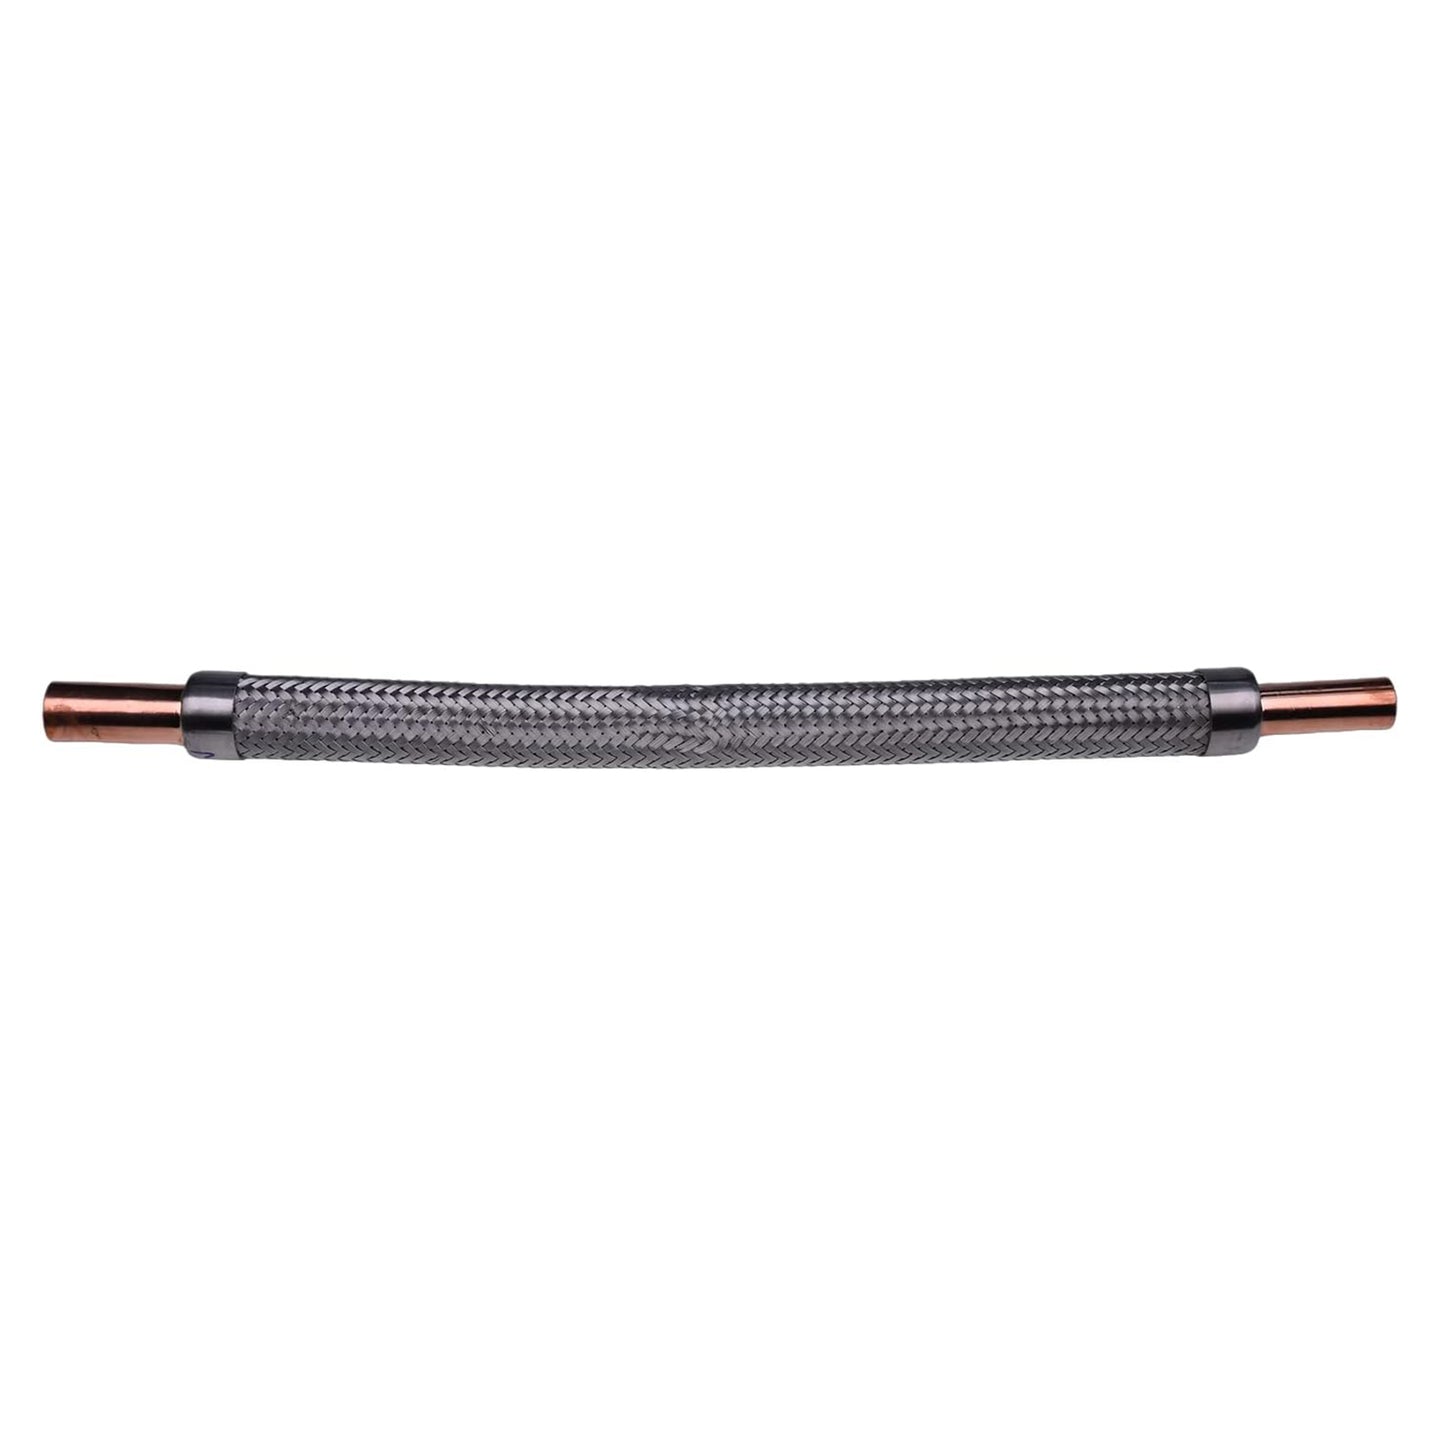 66-5784 Discharge Vibrasorber Hose Compatible With Thermo King SL400 SL300 SL200 SL100